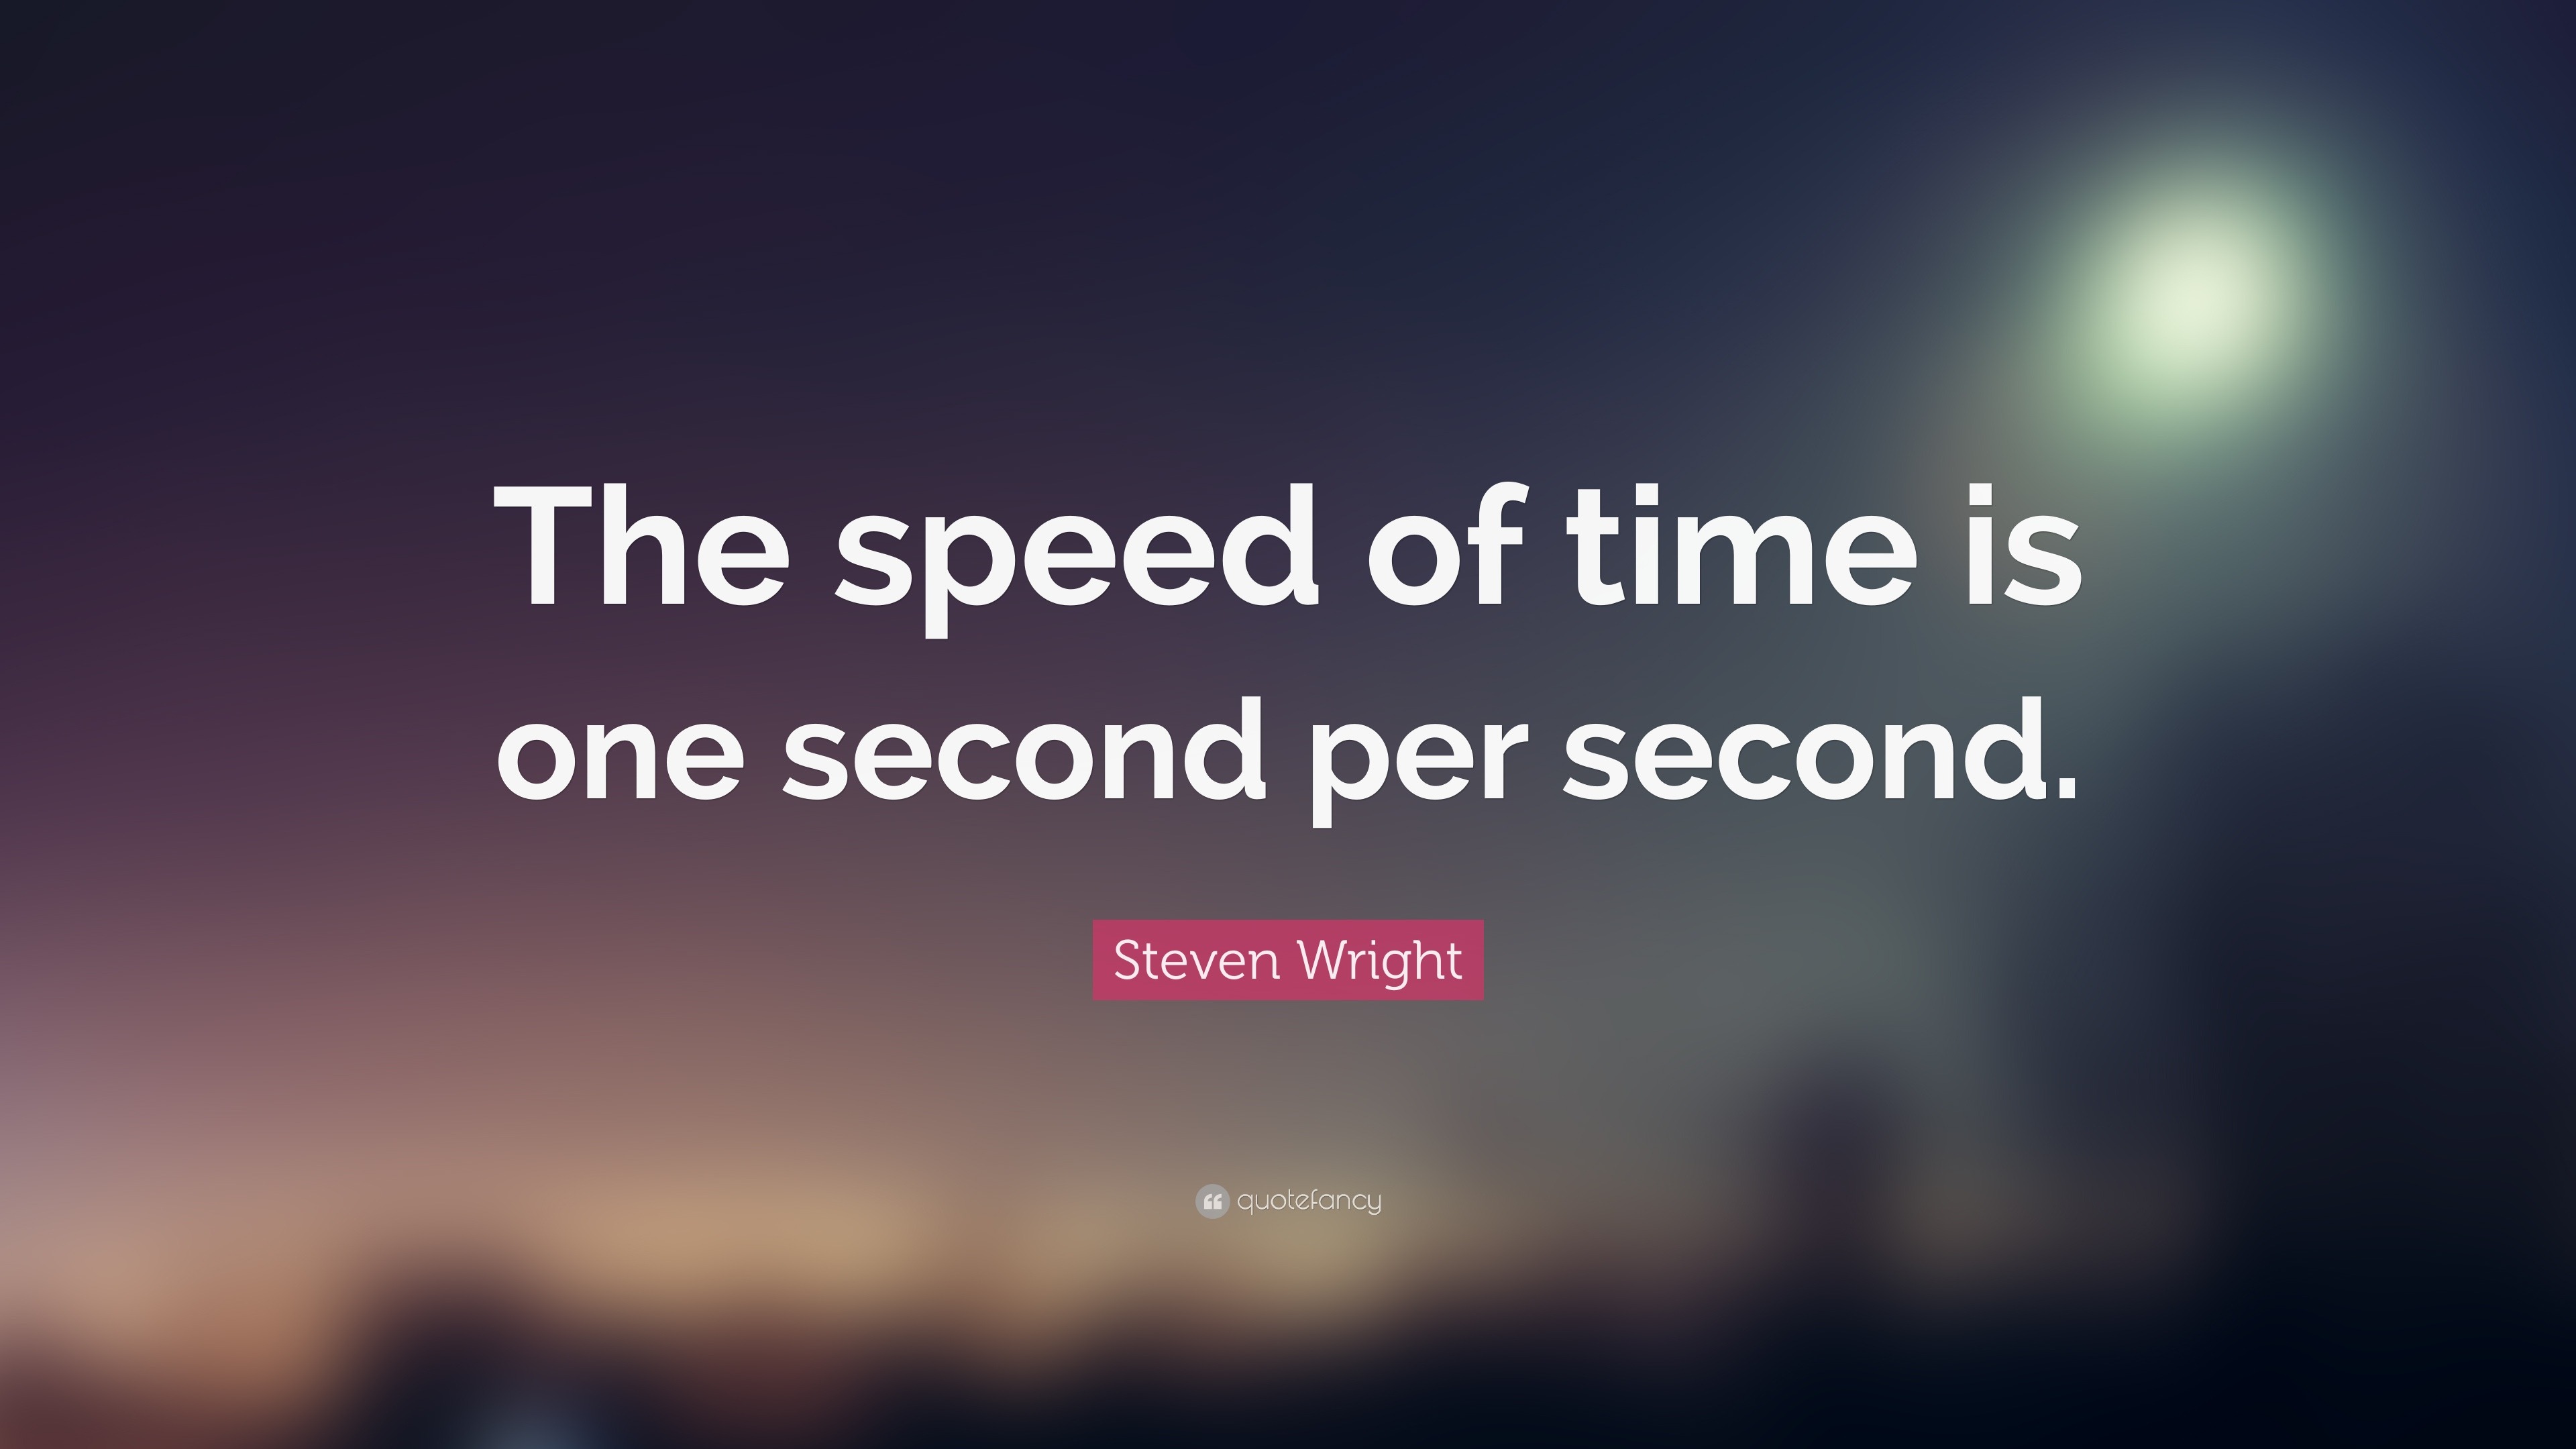 Steven Wright Quote: “The speed of time is one second per second.” (7